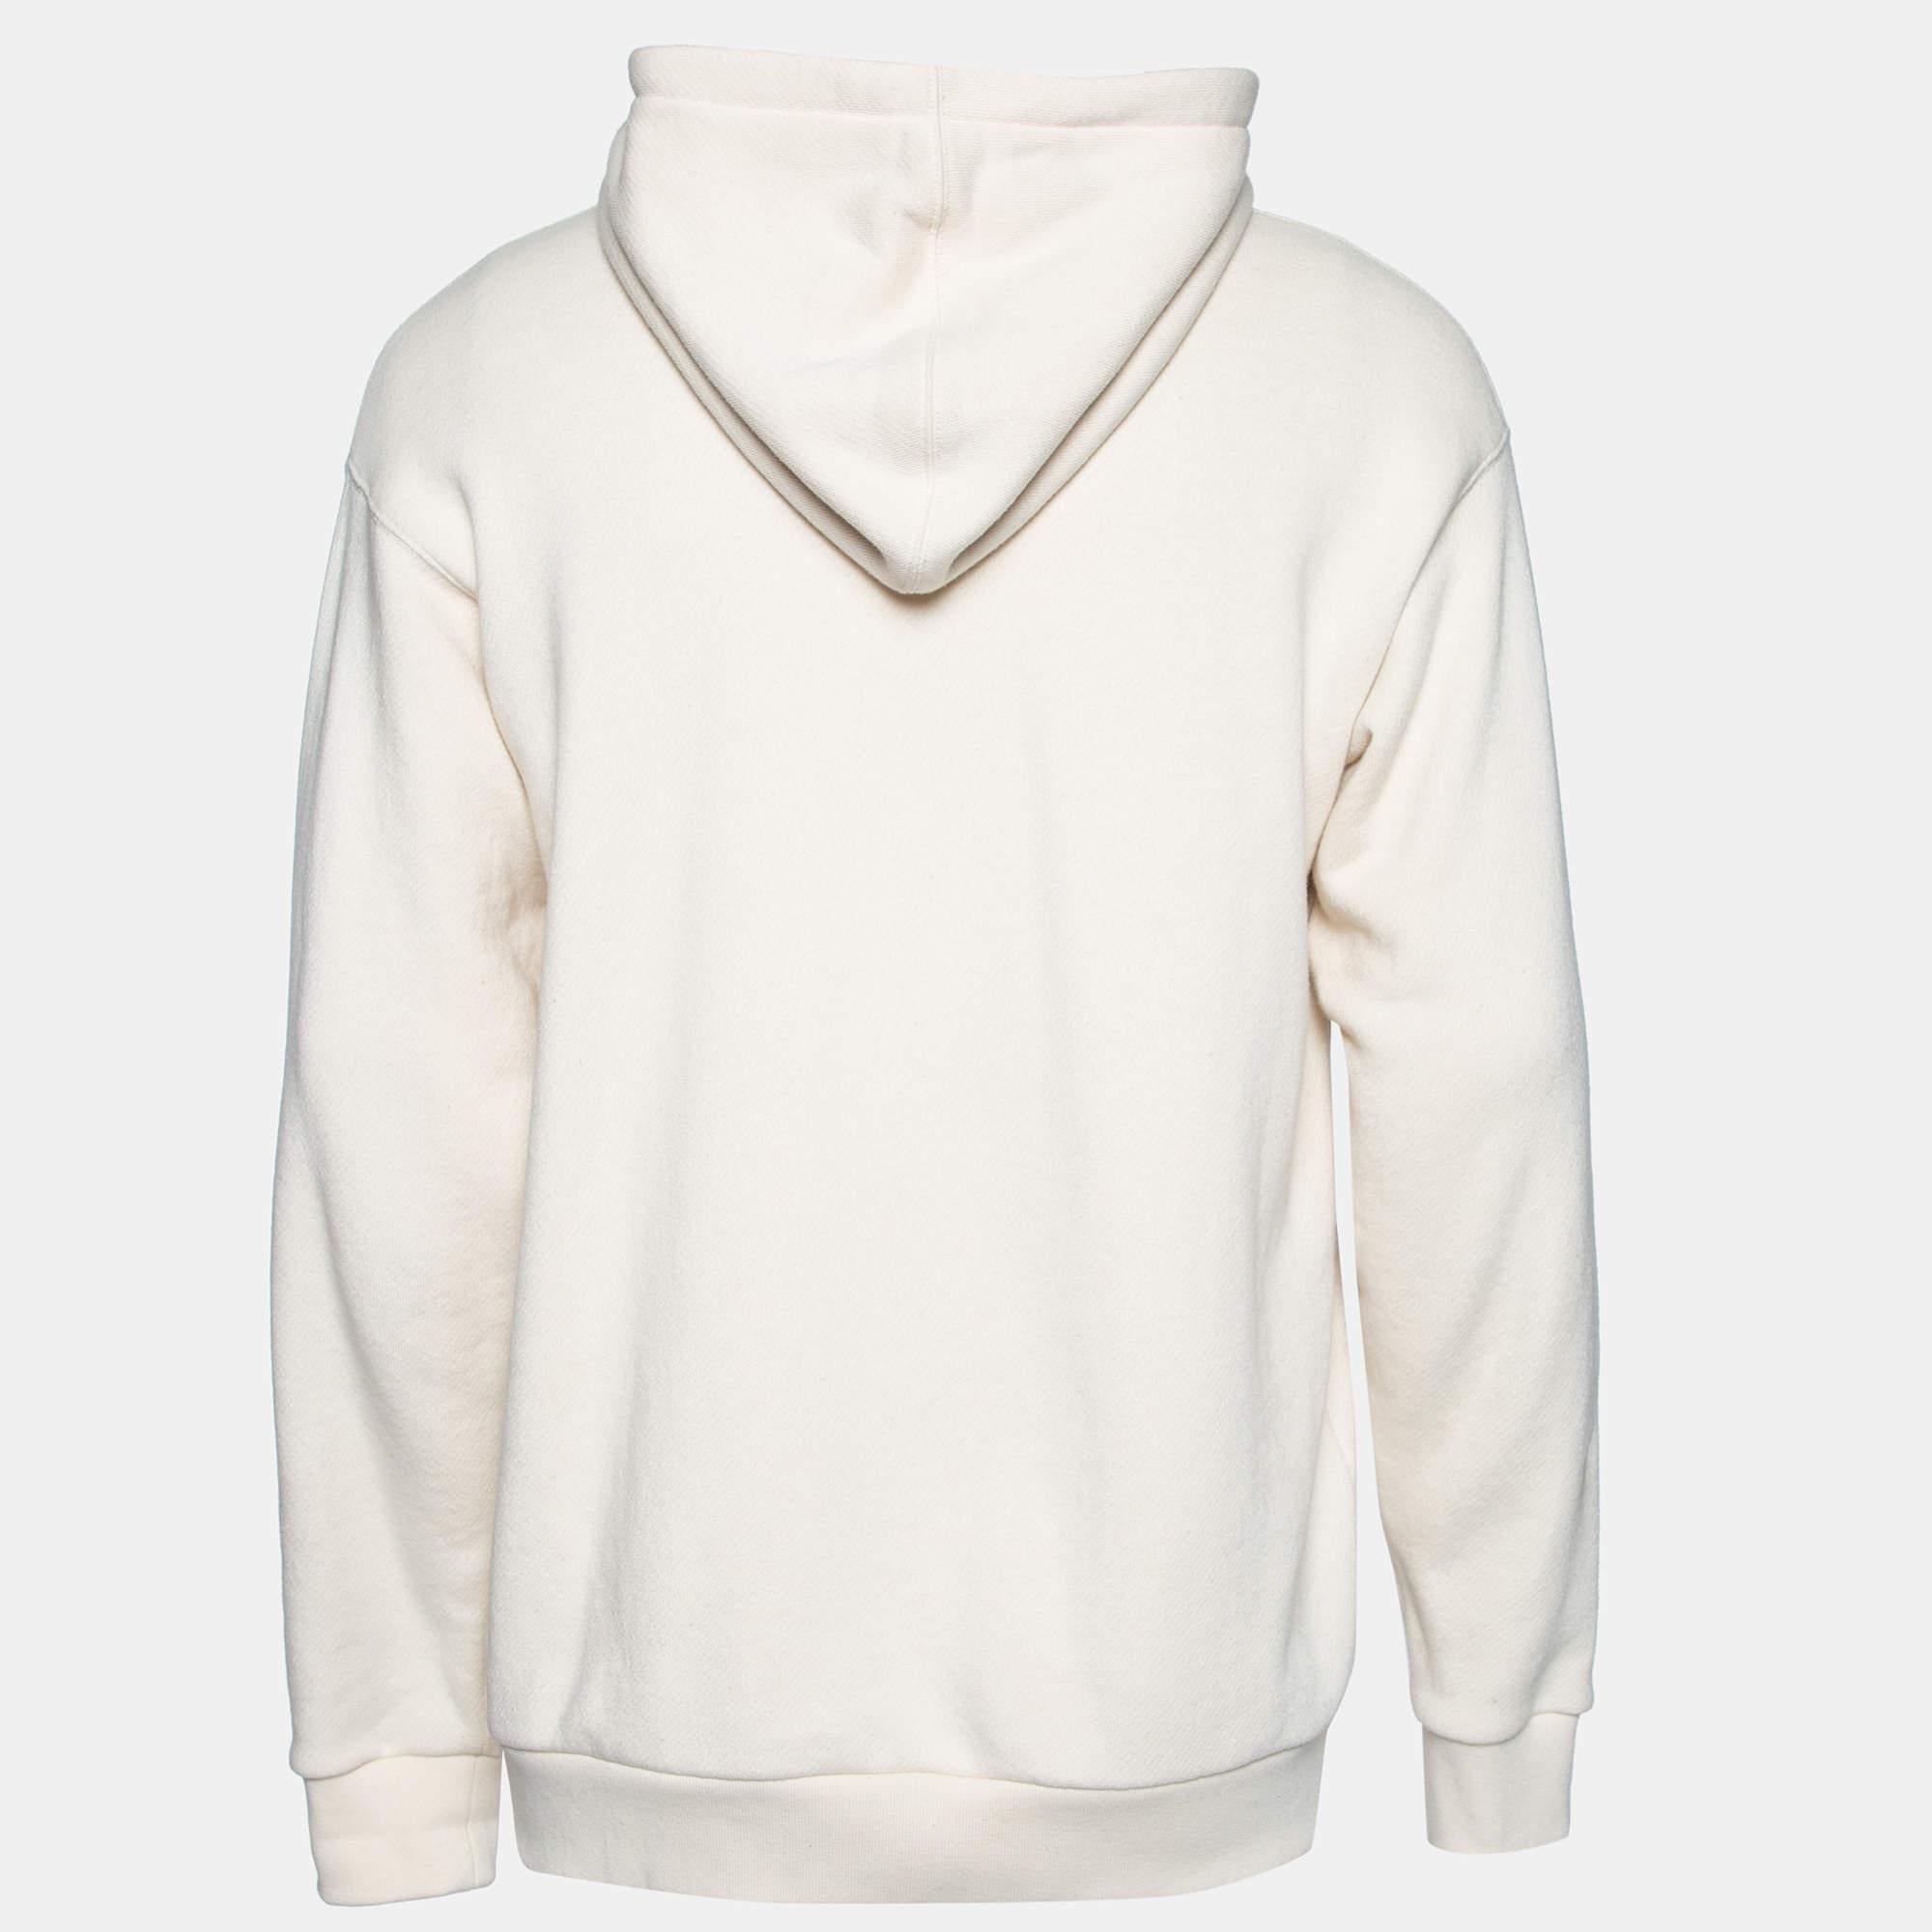 This hoodie from the House of Gucci will keep your style trendy and classy! It is made from cream terry knit fabric, which shows a multicolored print and a pearl-embellished logo on the front. It has long sleeves. This stunning Gucci hoodie will